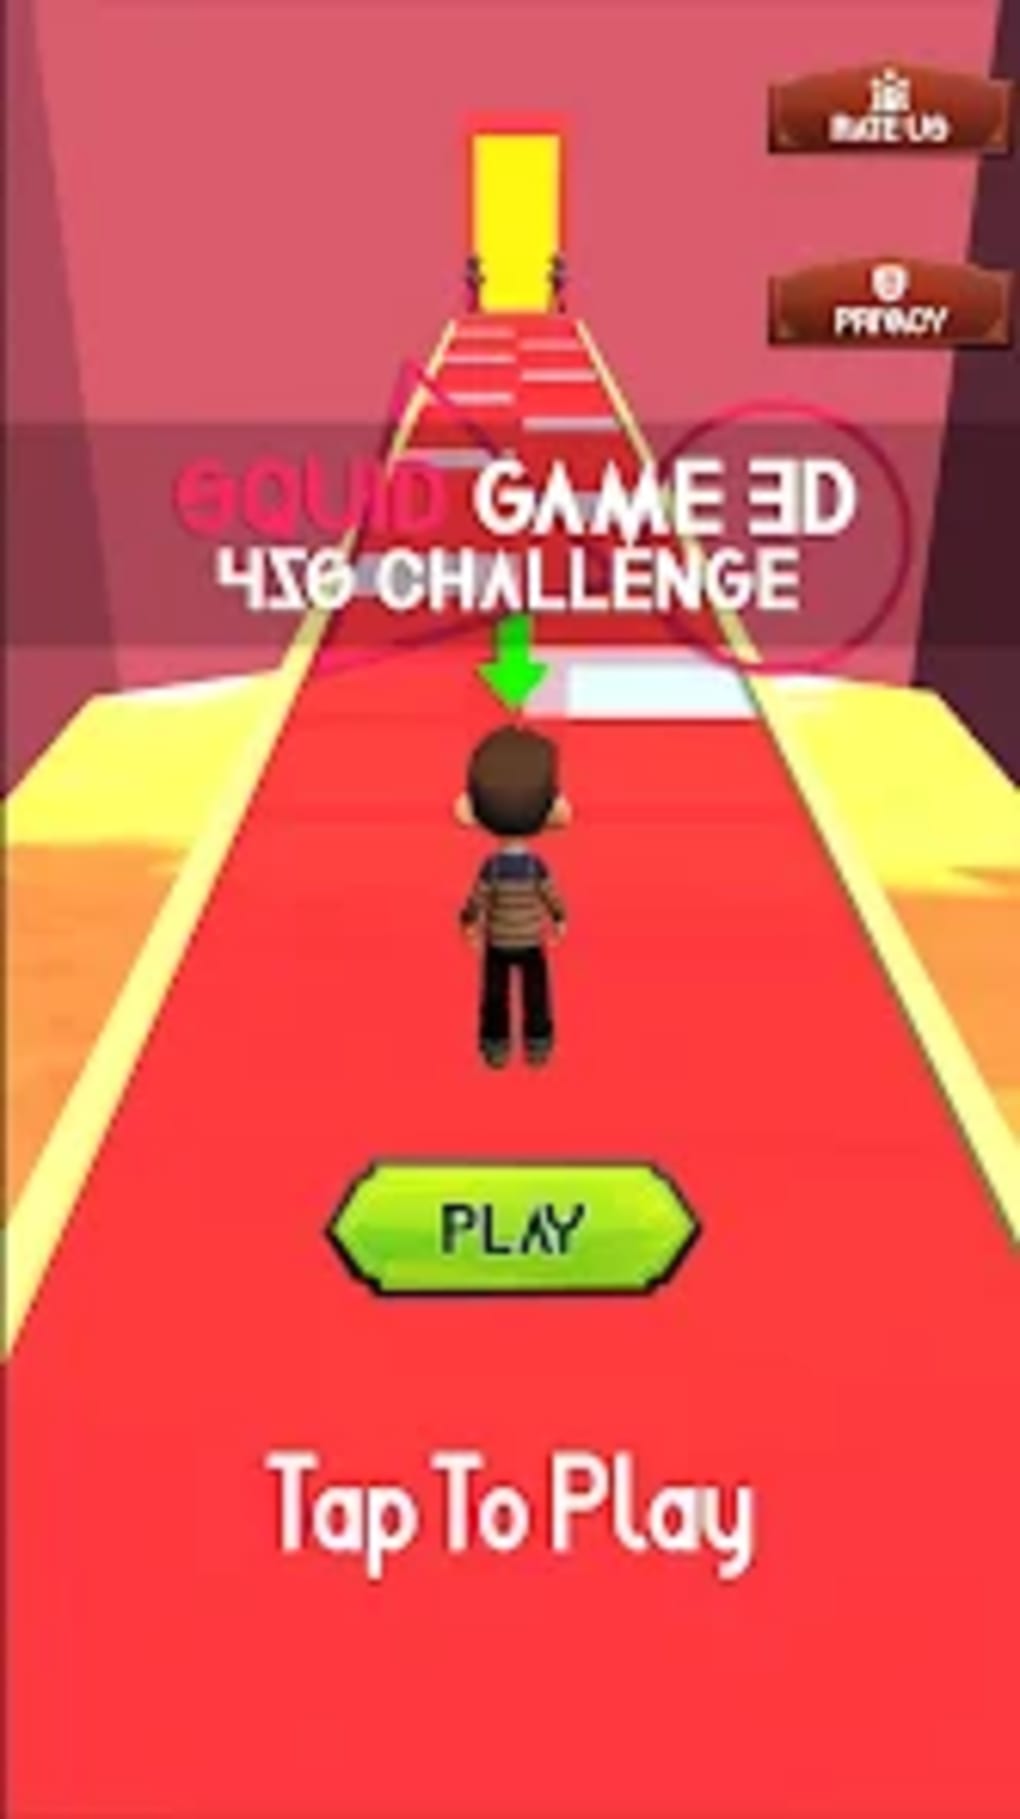 About: Squid Game Challenge (Google Play version)